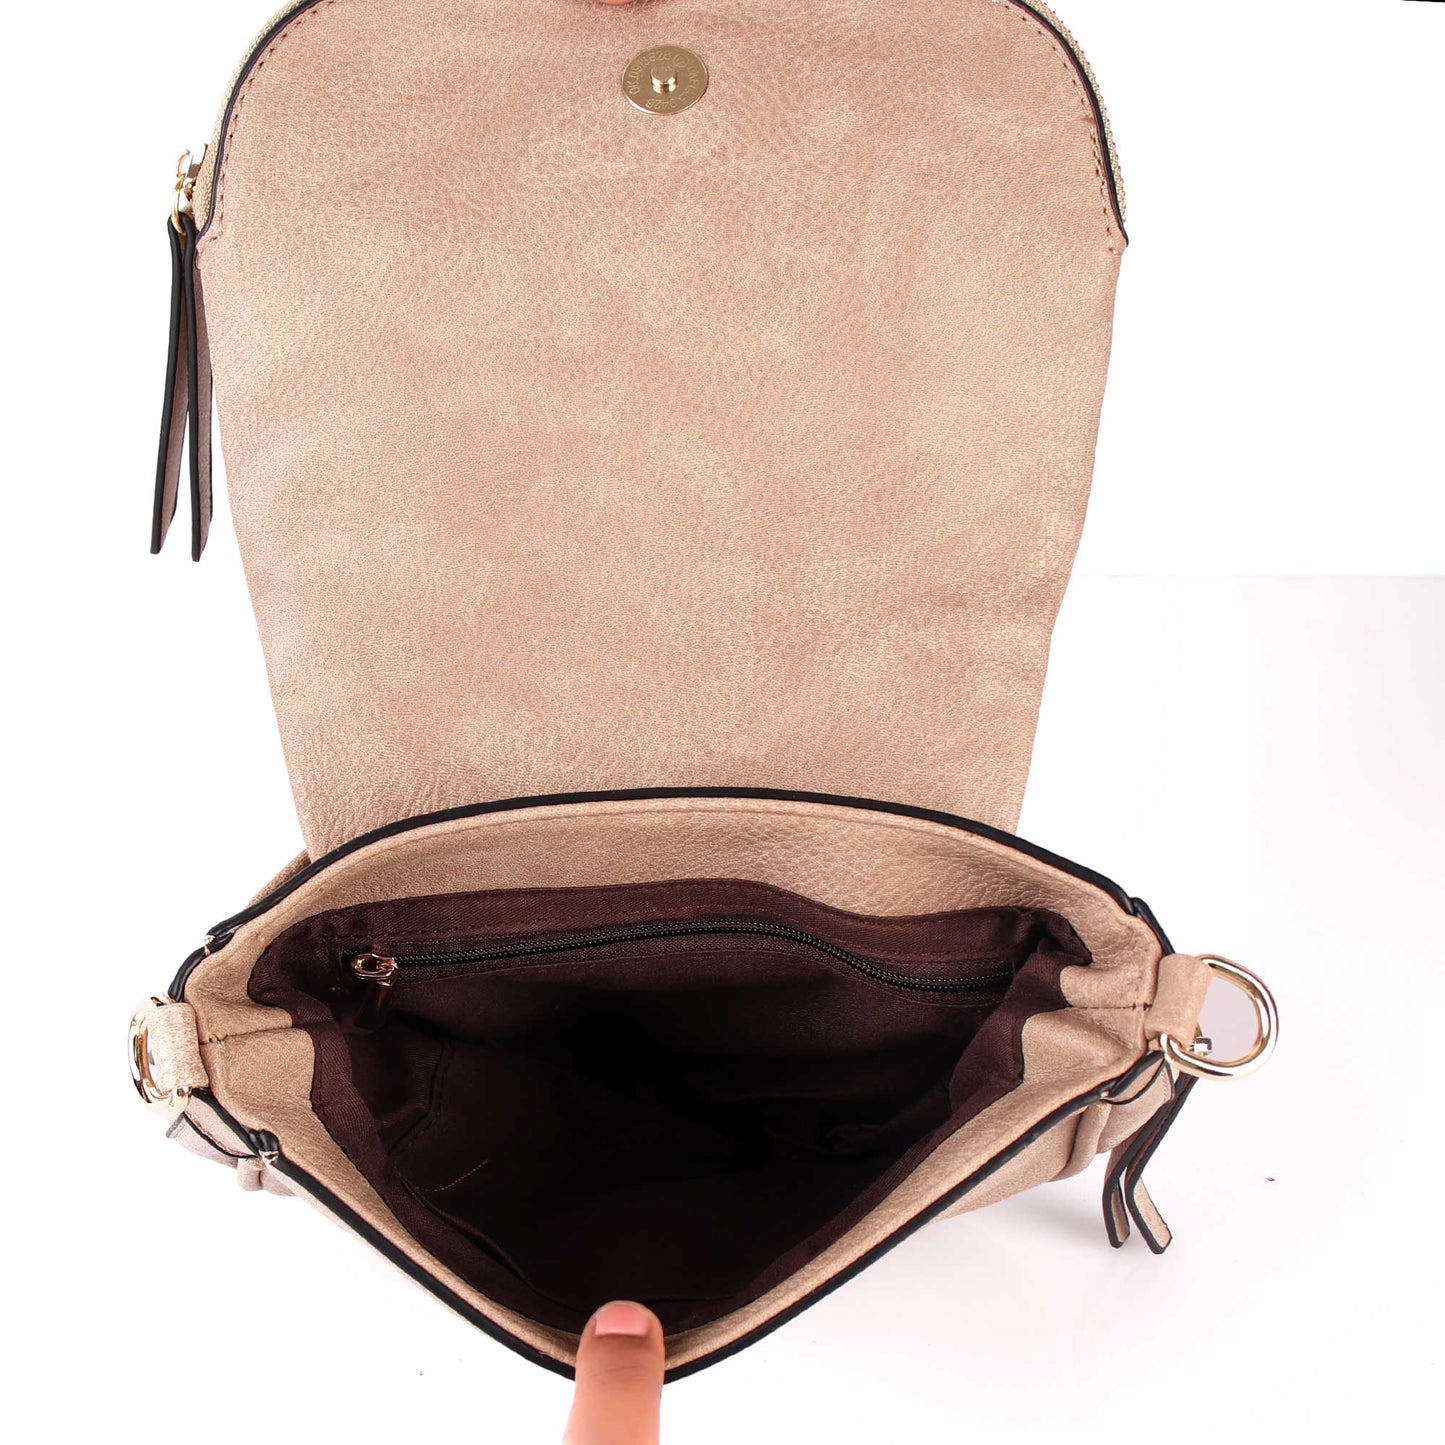 The Classic conventional Stylish Brown Sling Bag